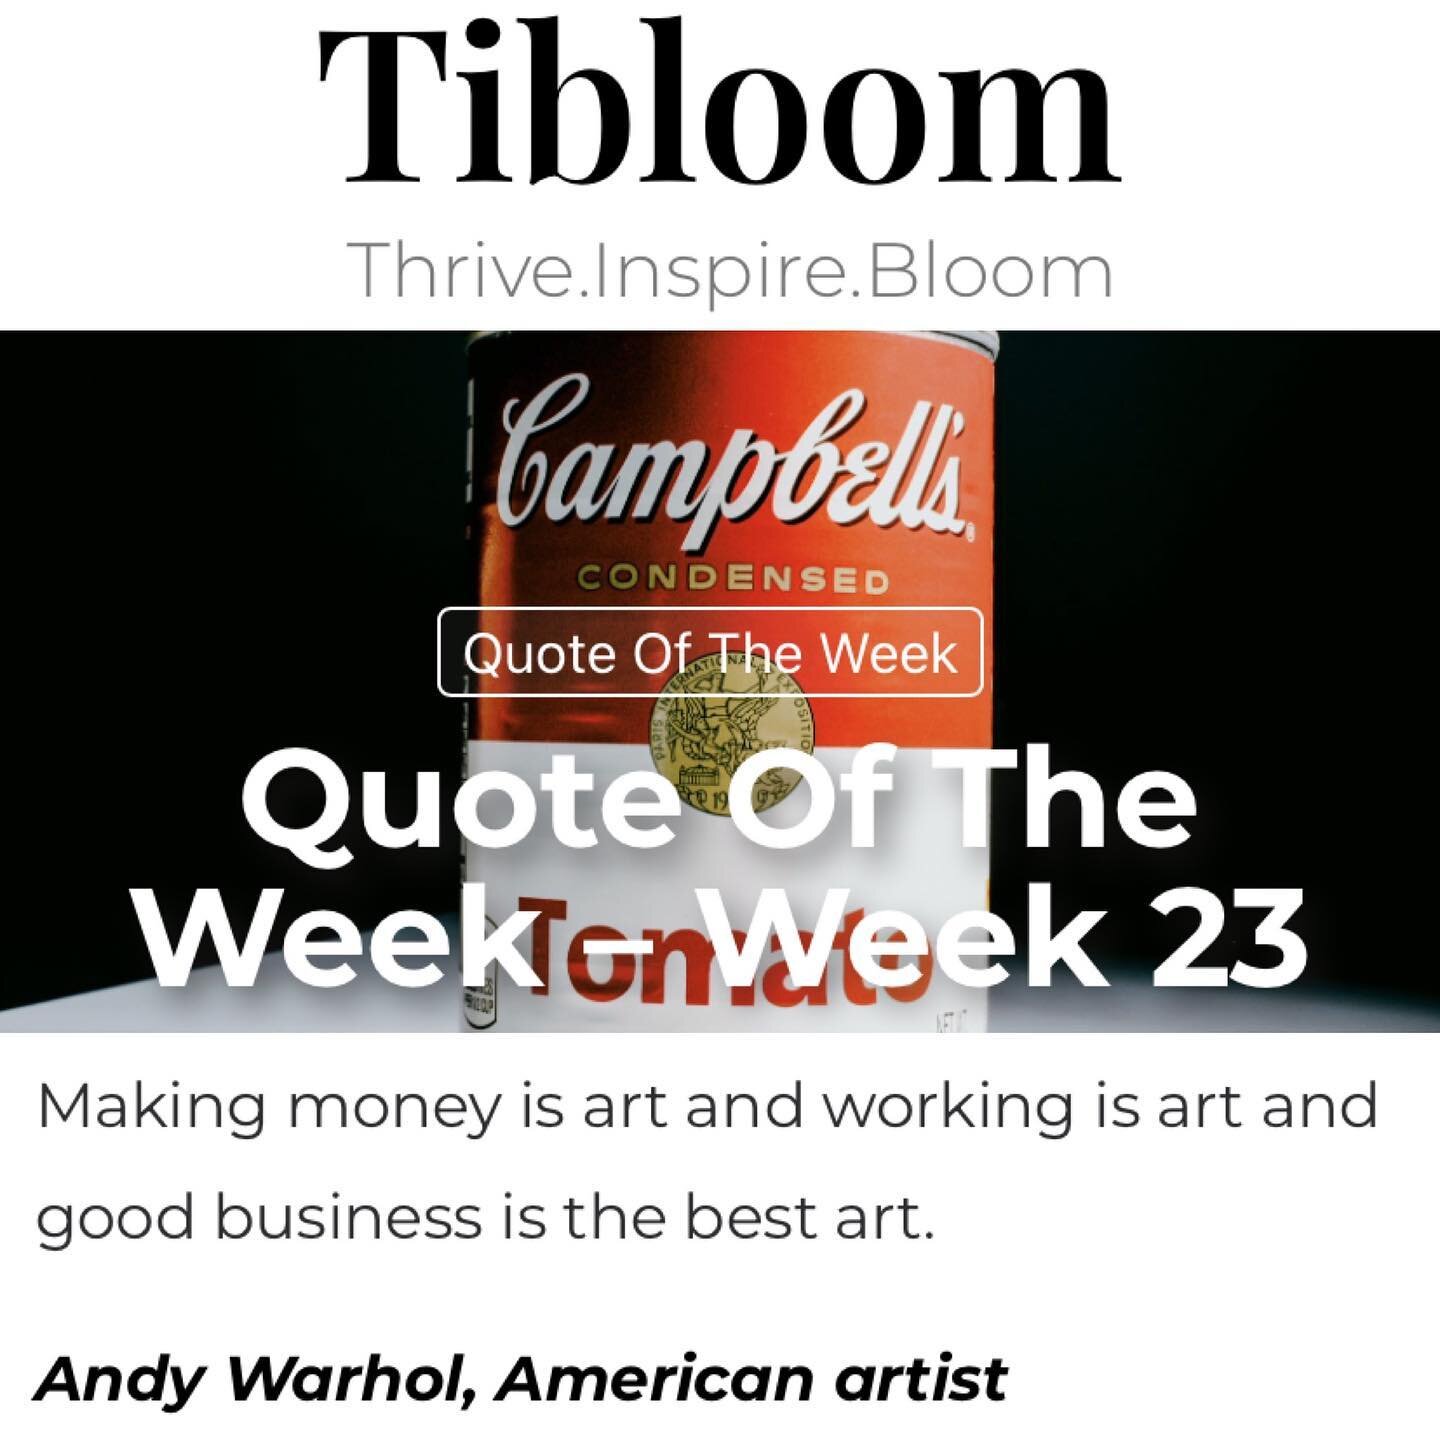 #quotes at https://tibloom.com/quote-of-the-week/quote-of-the-week-week-23/
#wisdom